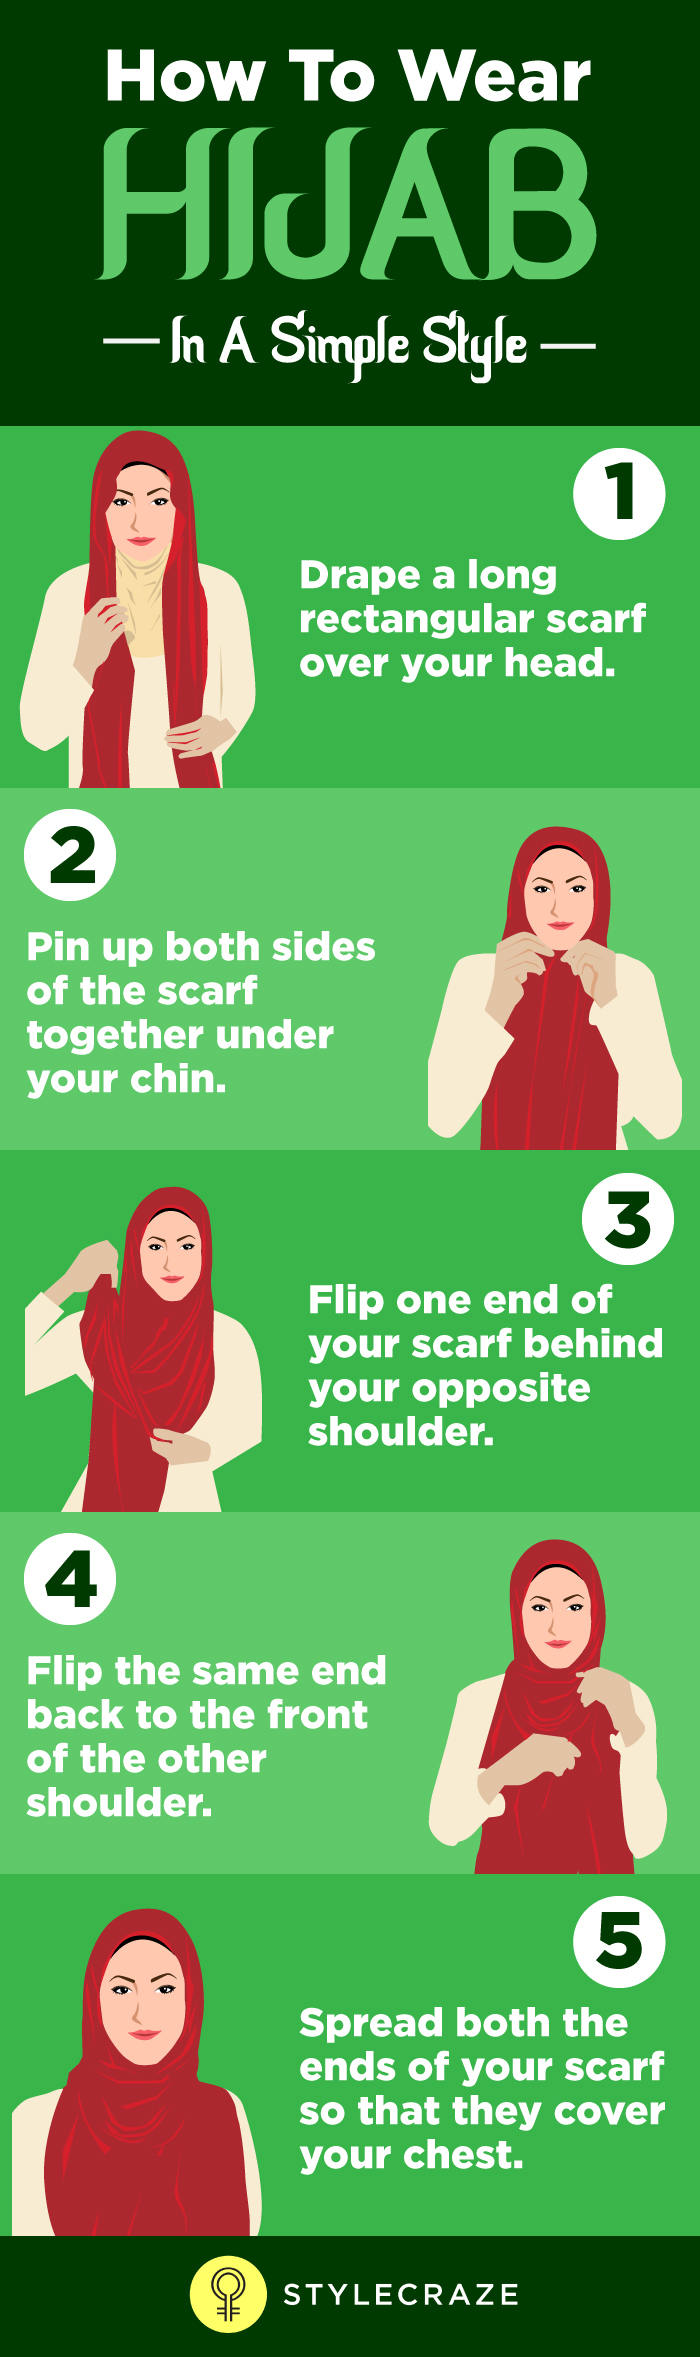 let’s first check out the easiest way to wrap your hijab